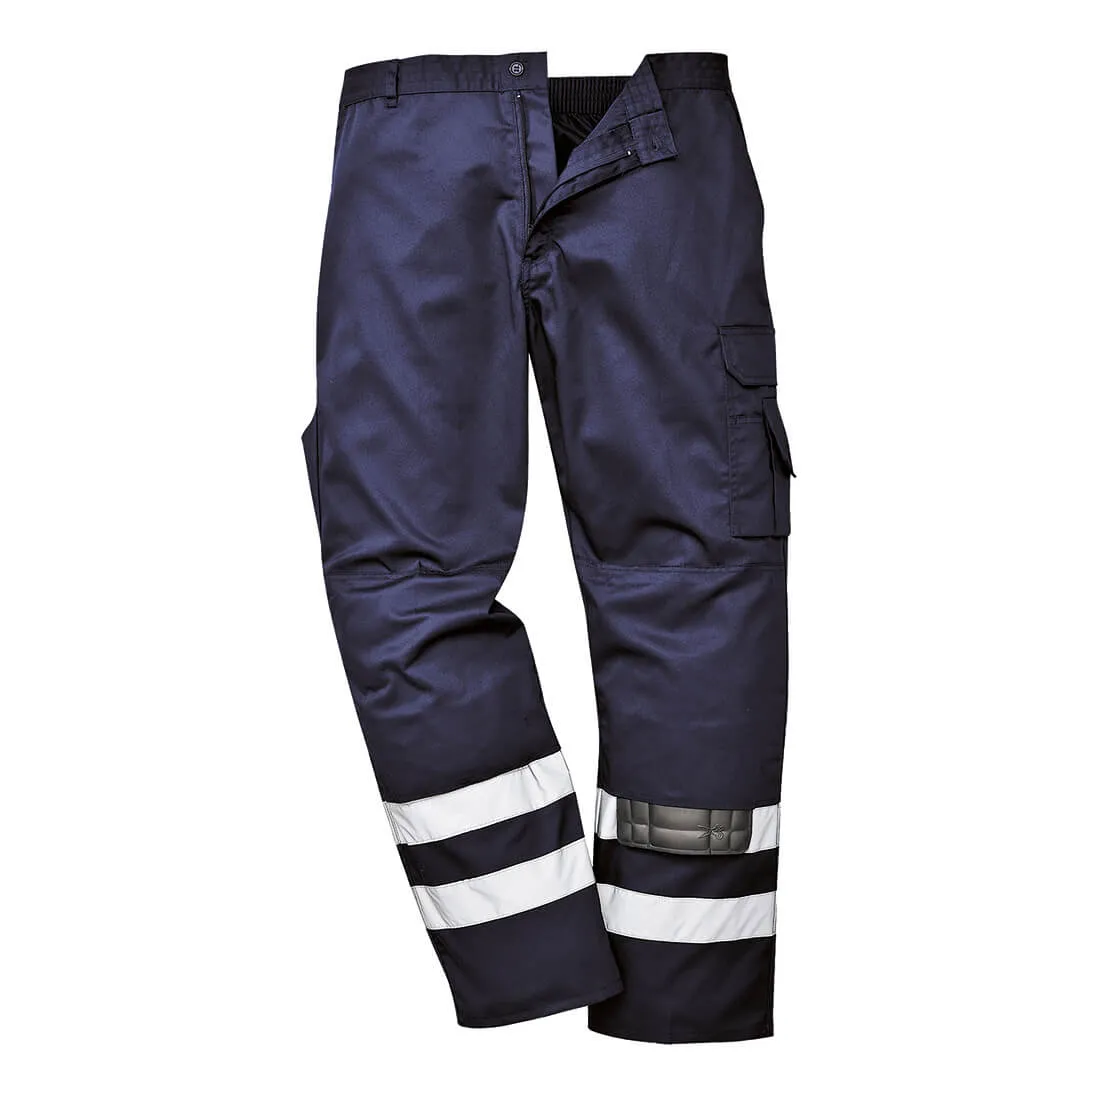 Portwest Iona S917 Safety Trousers - Navy Blue, Small, 33"